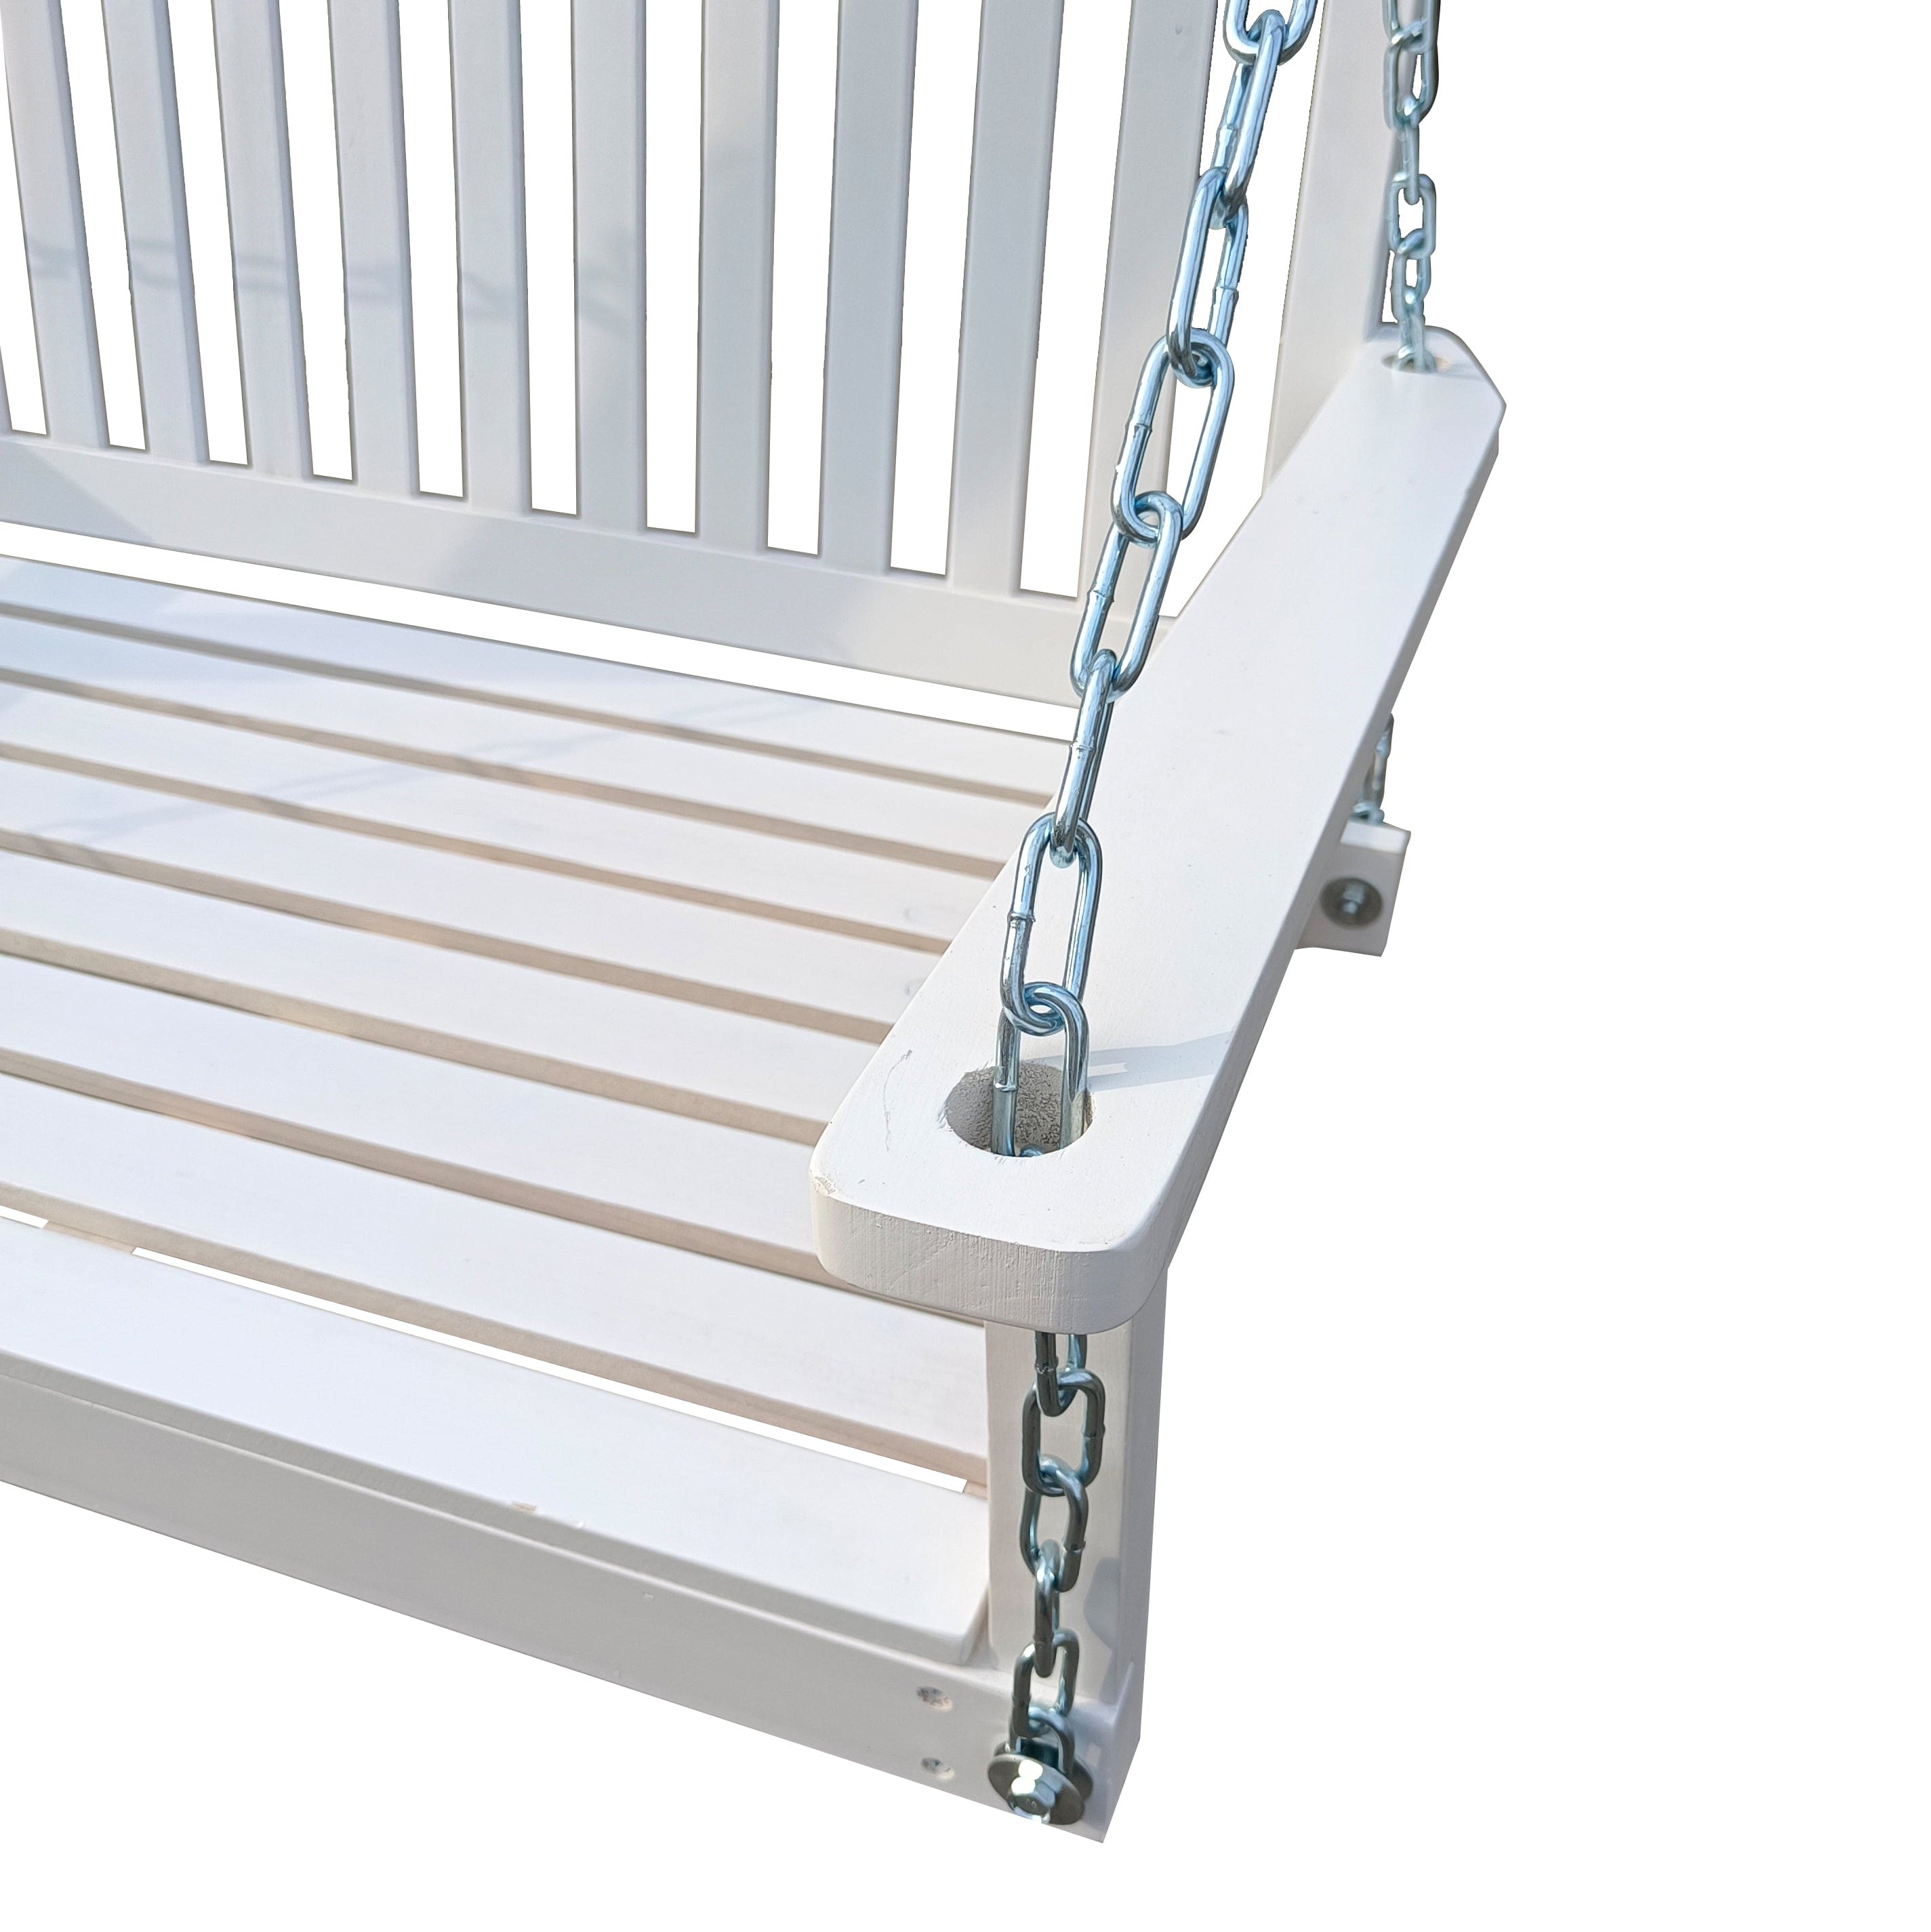 Front Porch Swing with Armrests, Wood Bench Swing with Hanging Chains,for Outdoor Patio ,Garden Yard, porch, backyard,  or sunroom,Easy to Assemble,white